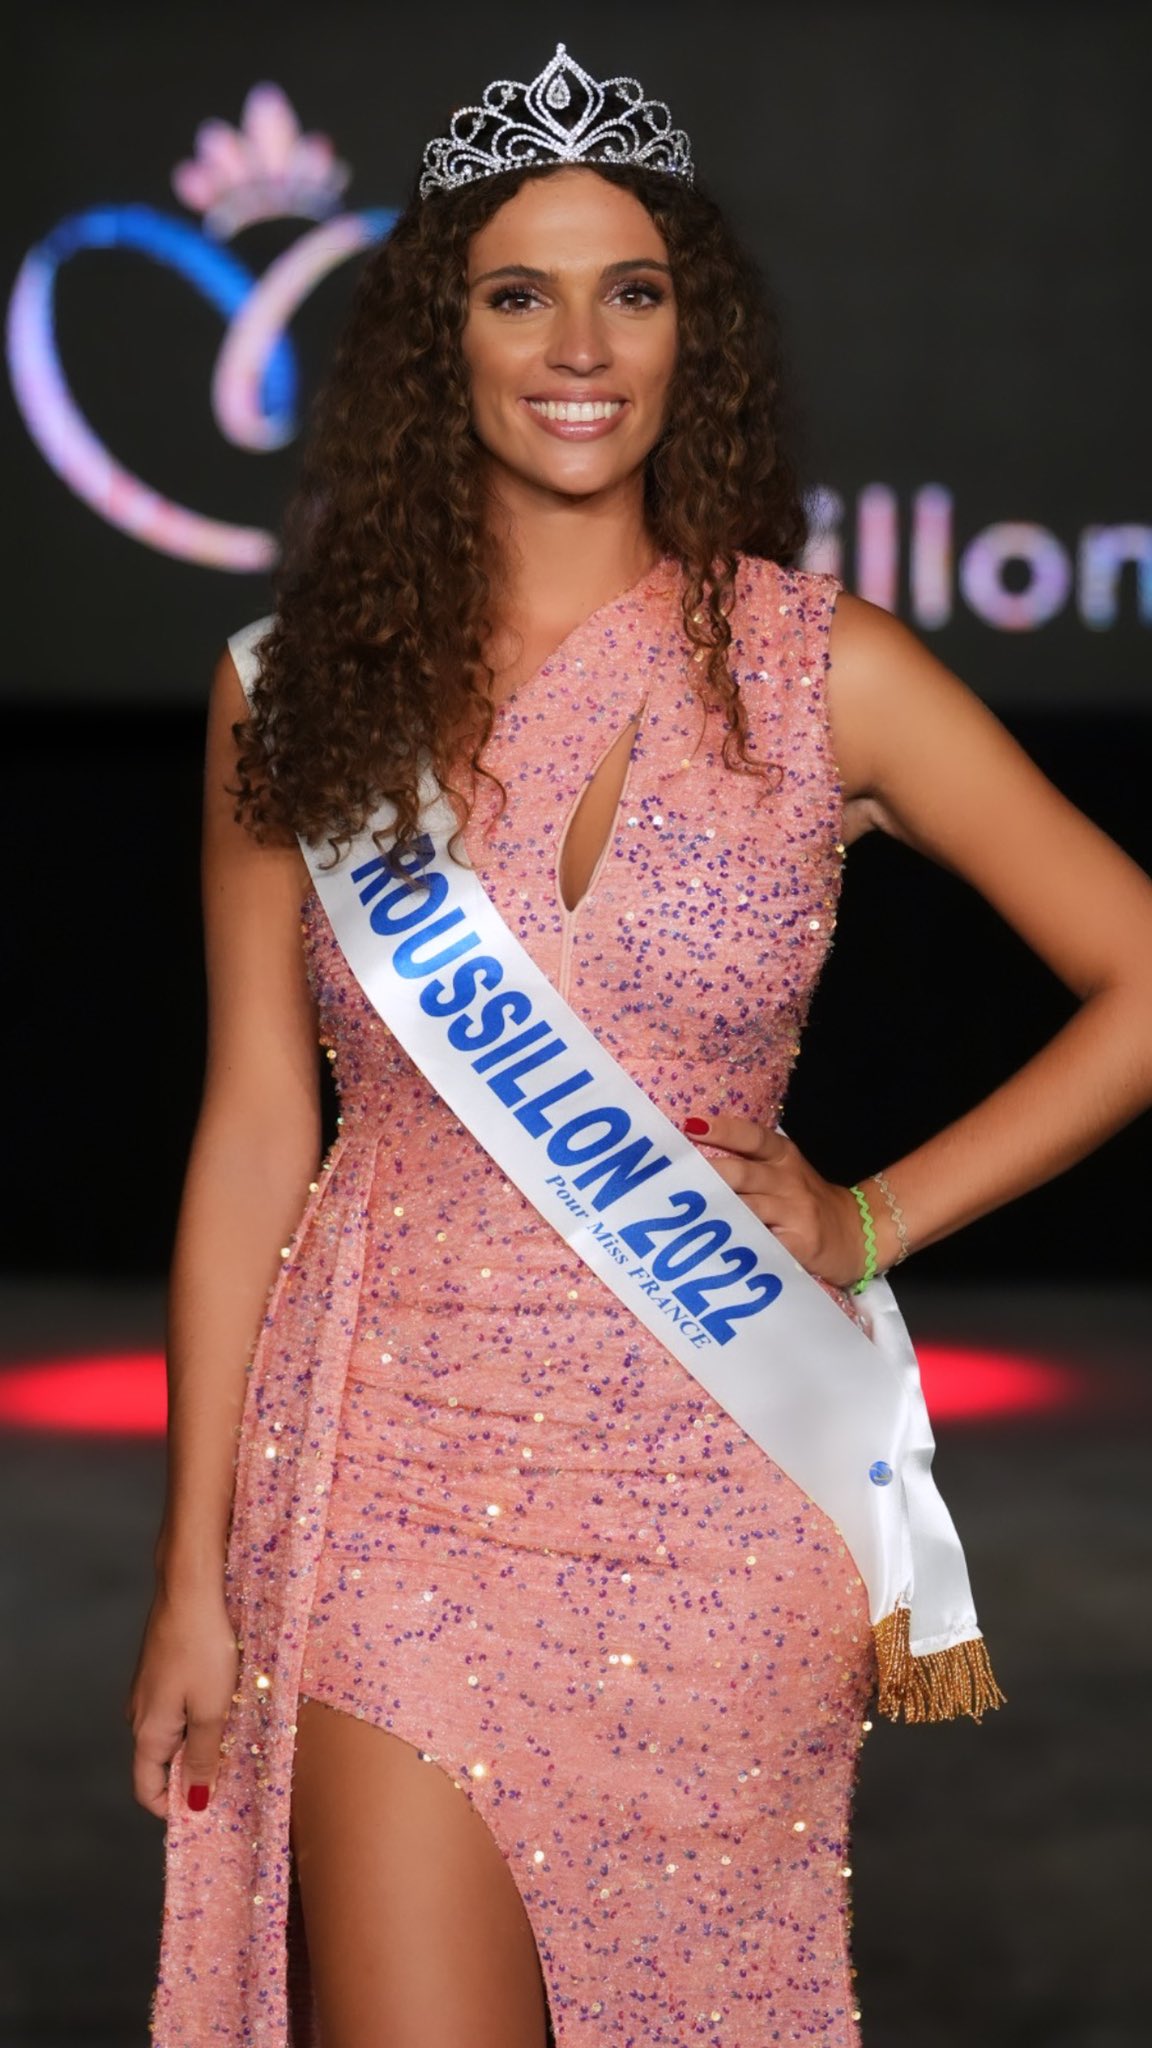 miss-france-rousillon-2023-2022-chira-fontaine